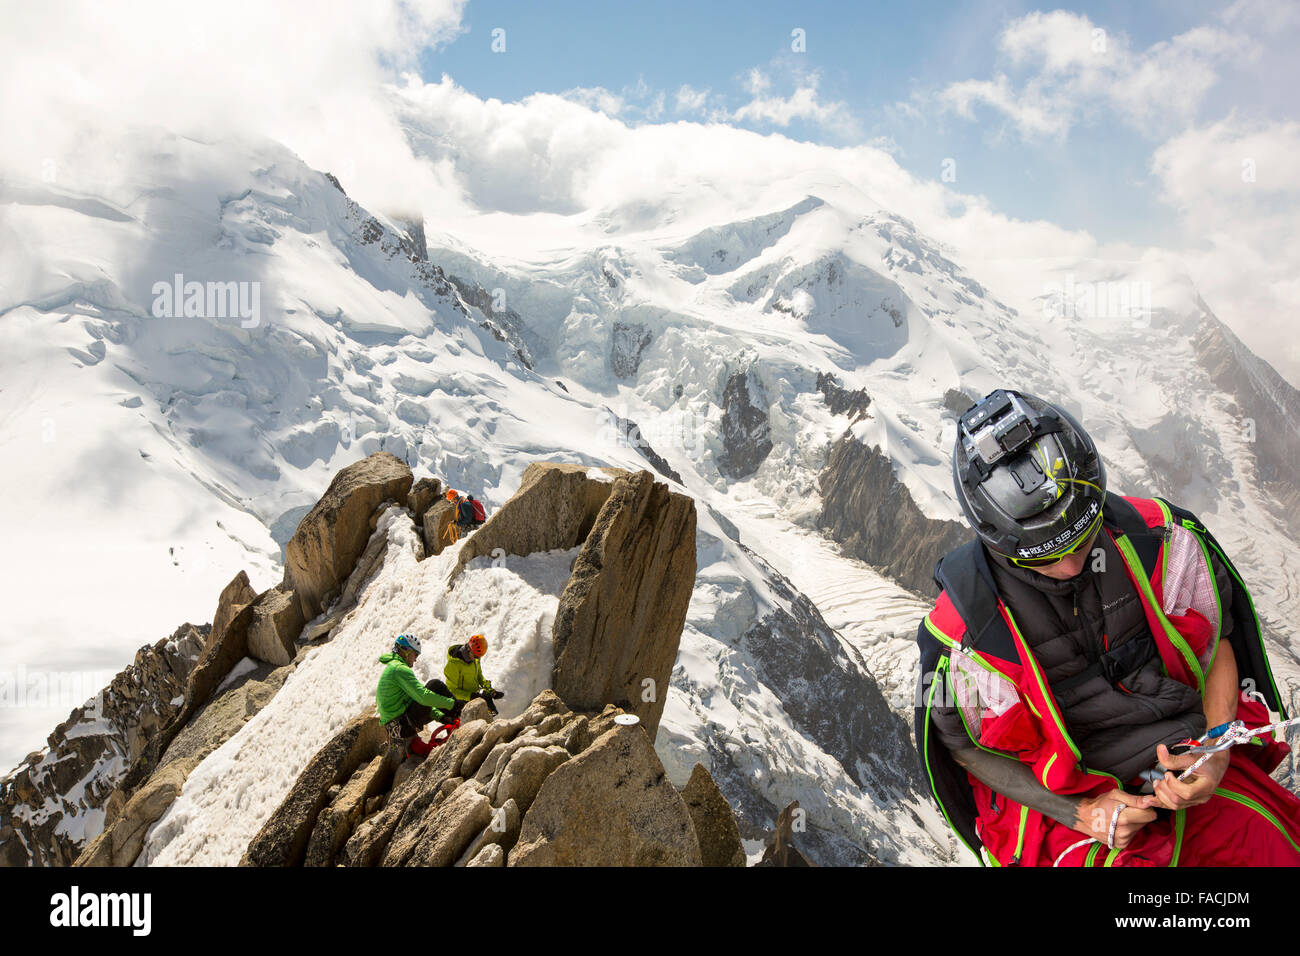 Mont Blanc from the Aiguille Du Midi above Chamonix, France, with climbers on the Cosmiques Arete and a base jumper abseiling. Stock Photo